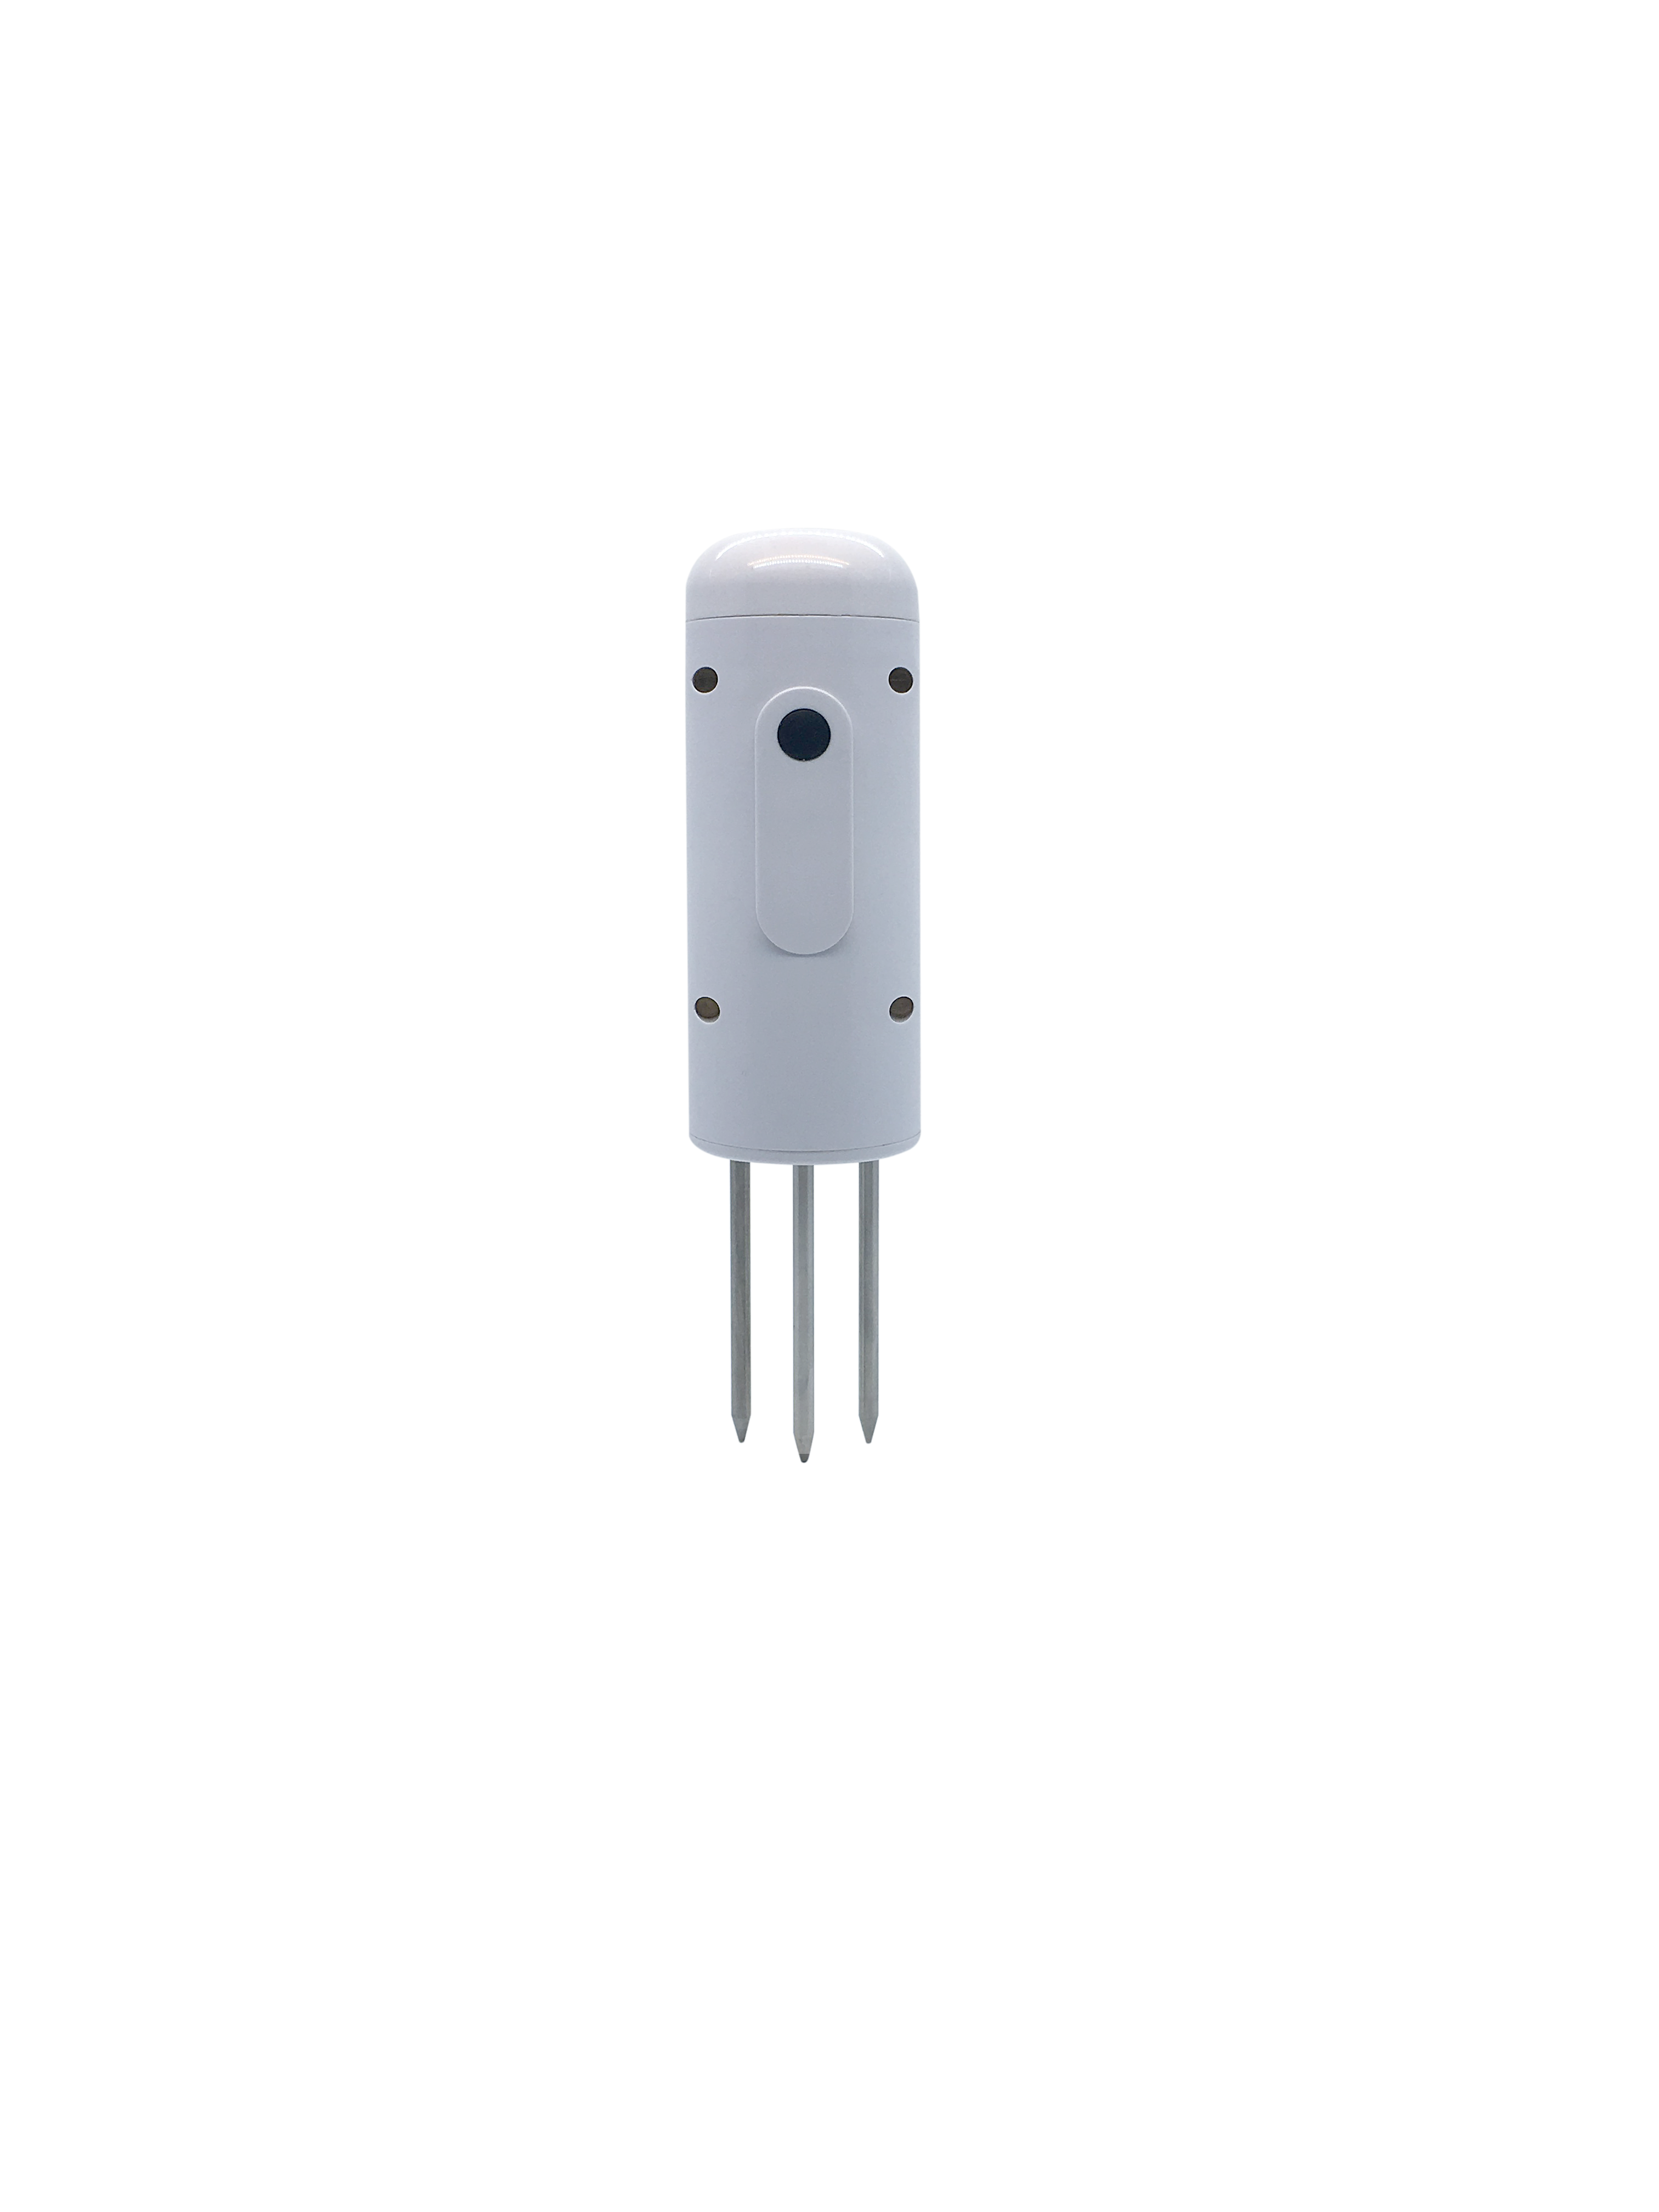 Corrosion Resistant Capacitive Soil Moisture Sensor for Humidity And Temperature Detection